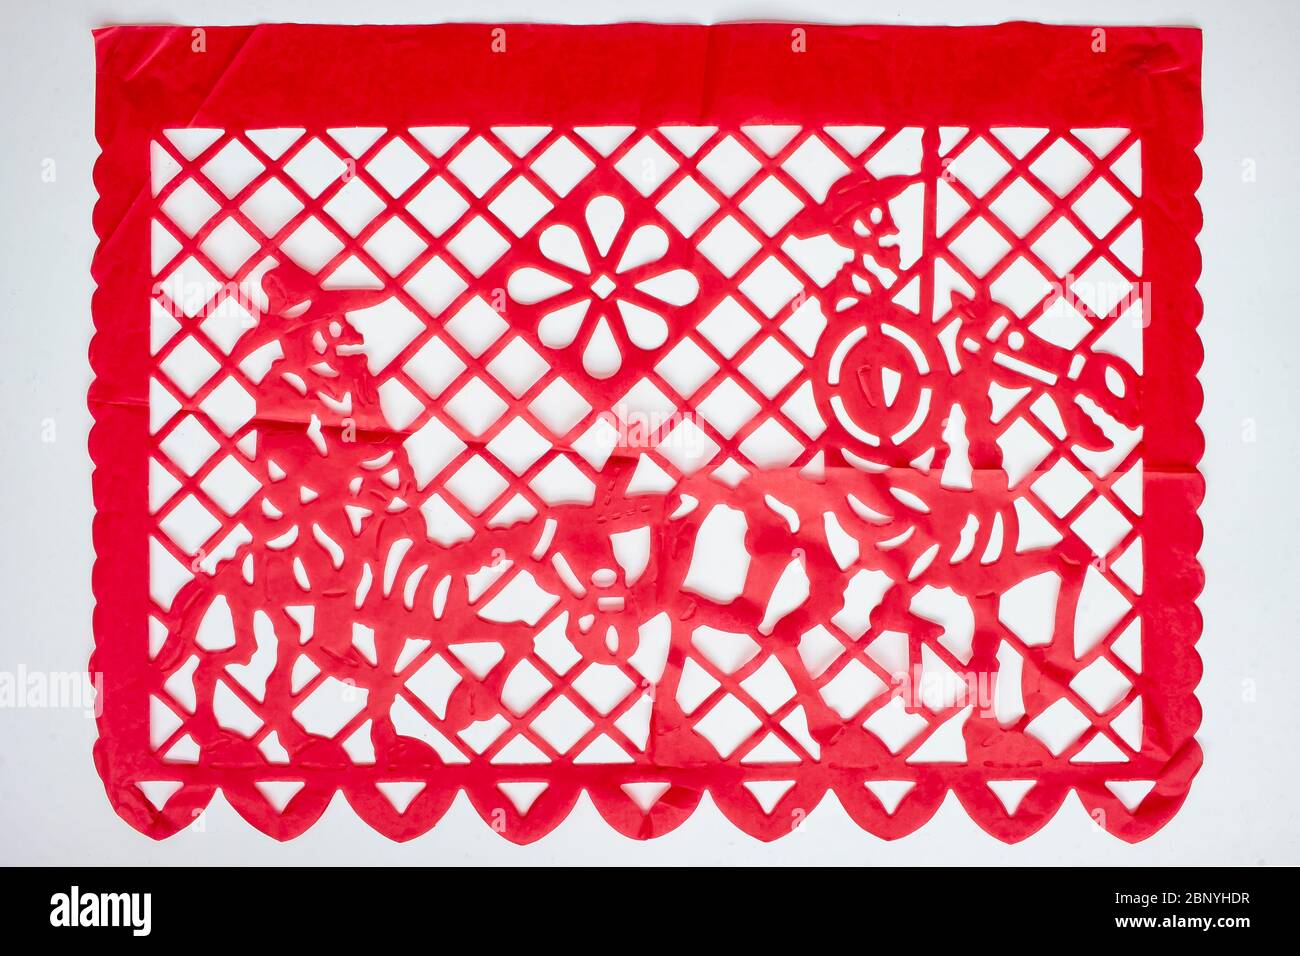 Day of the Dead, Papel Picado. Red Real traditional Mexican paper cutting flag. Isolated on white background. Stock Photo